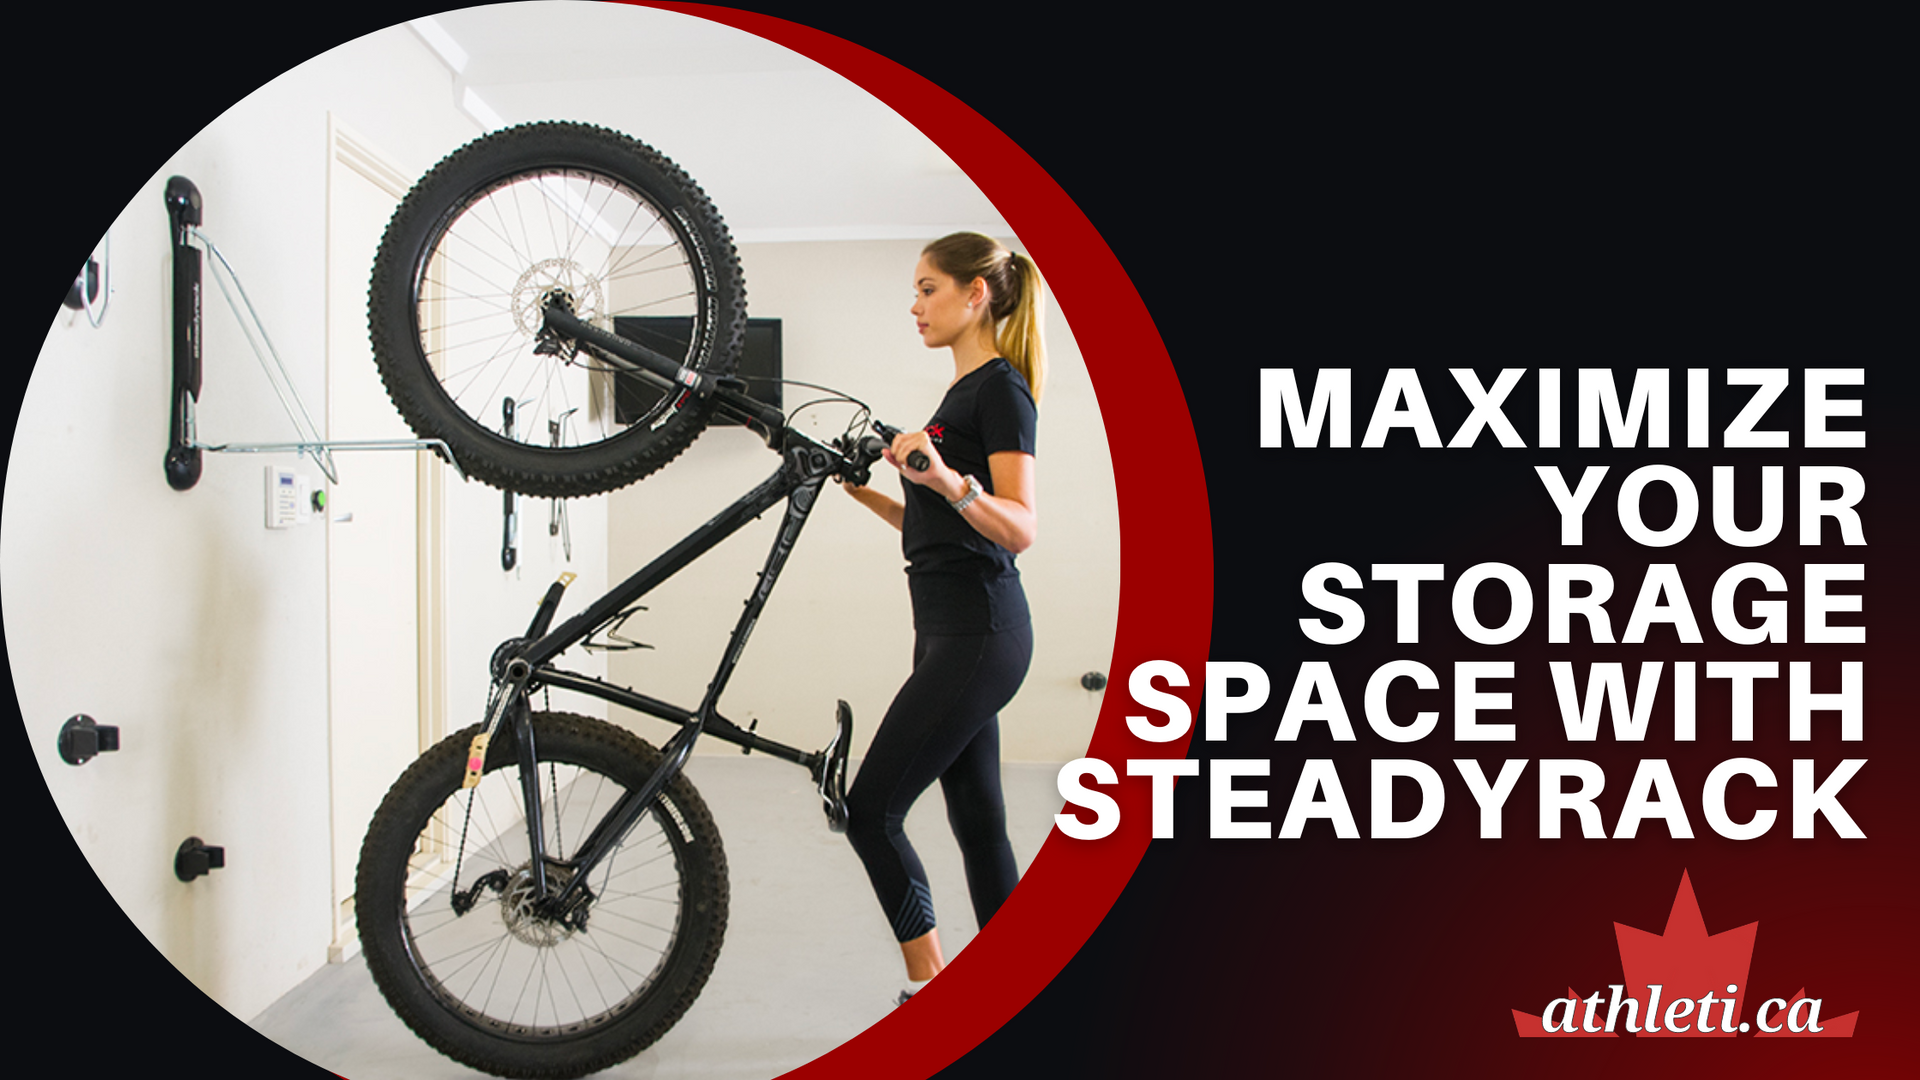 Maximize Your Storage Space with SteadyRack - The Ultimate Vertical Bike Storage Solution